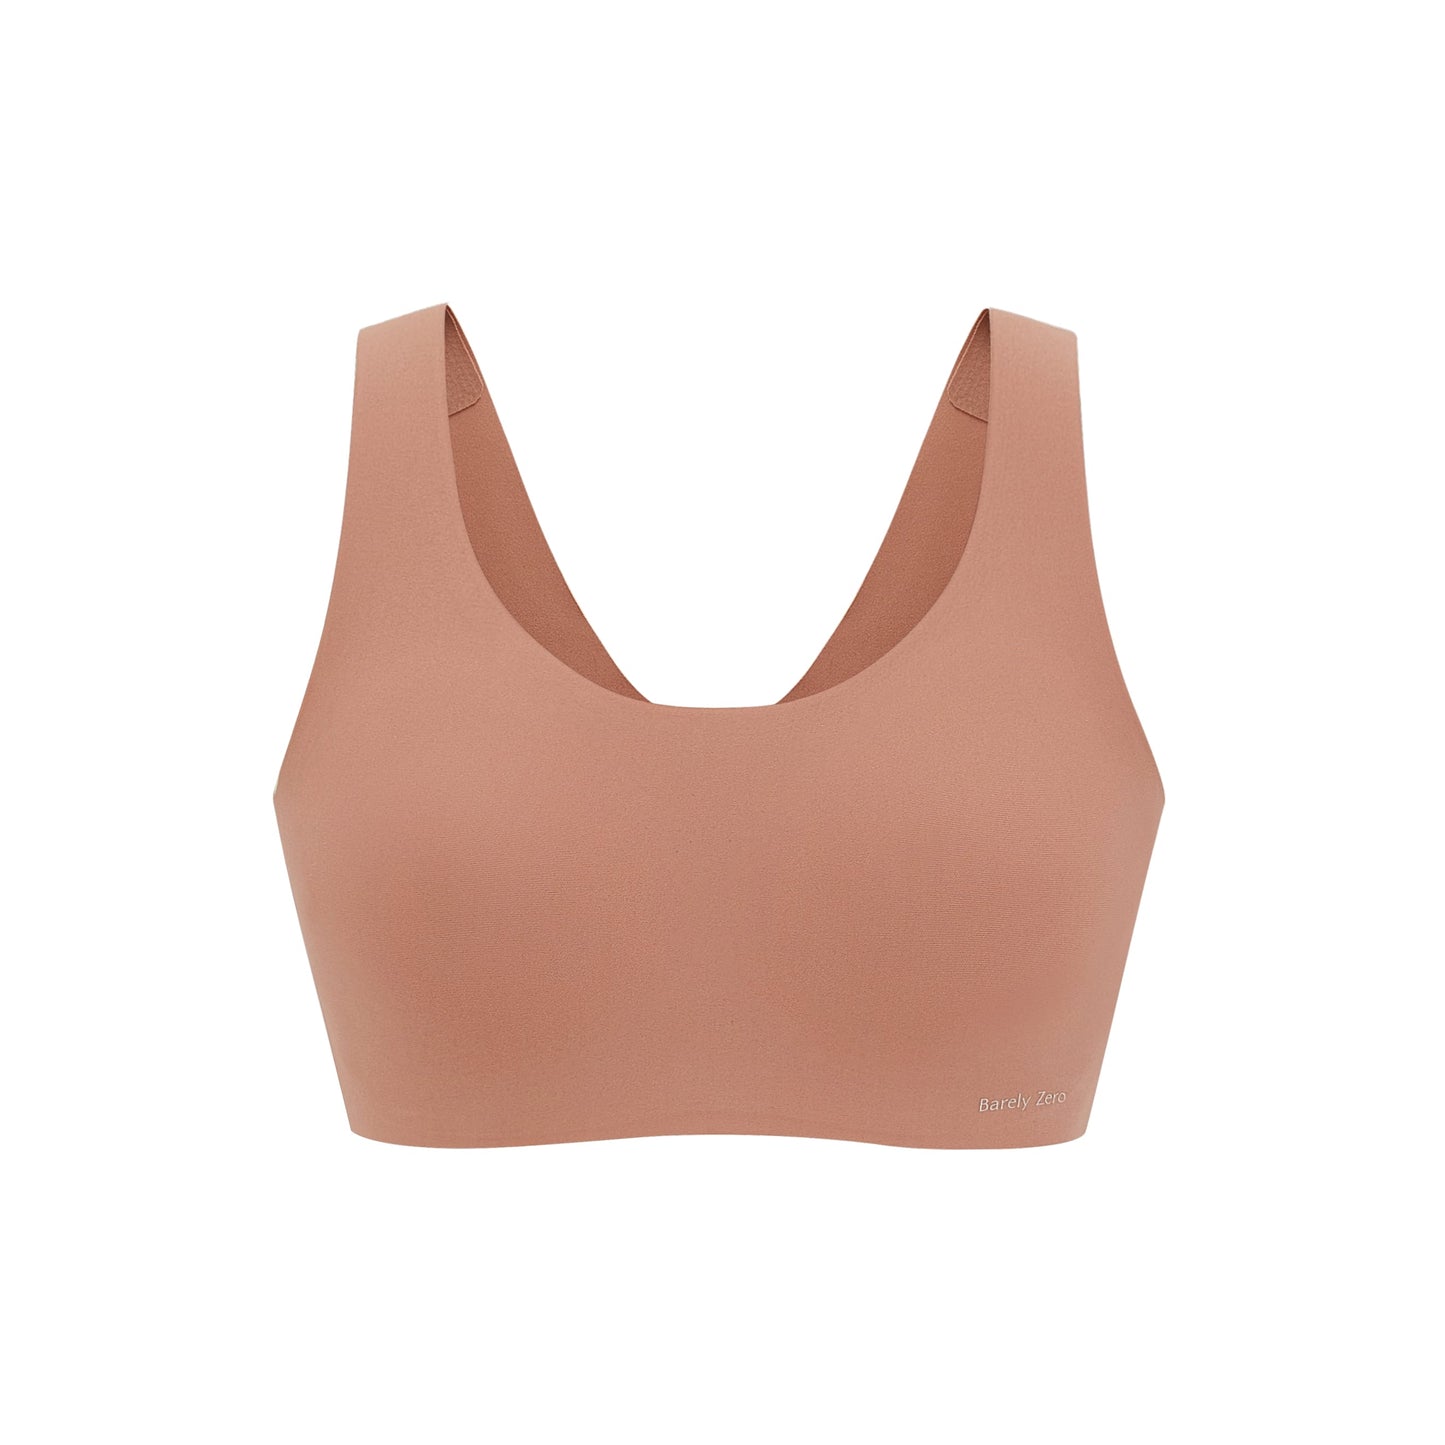 Flat lay image of rust-colored bra with thick straps